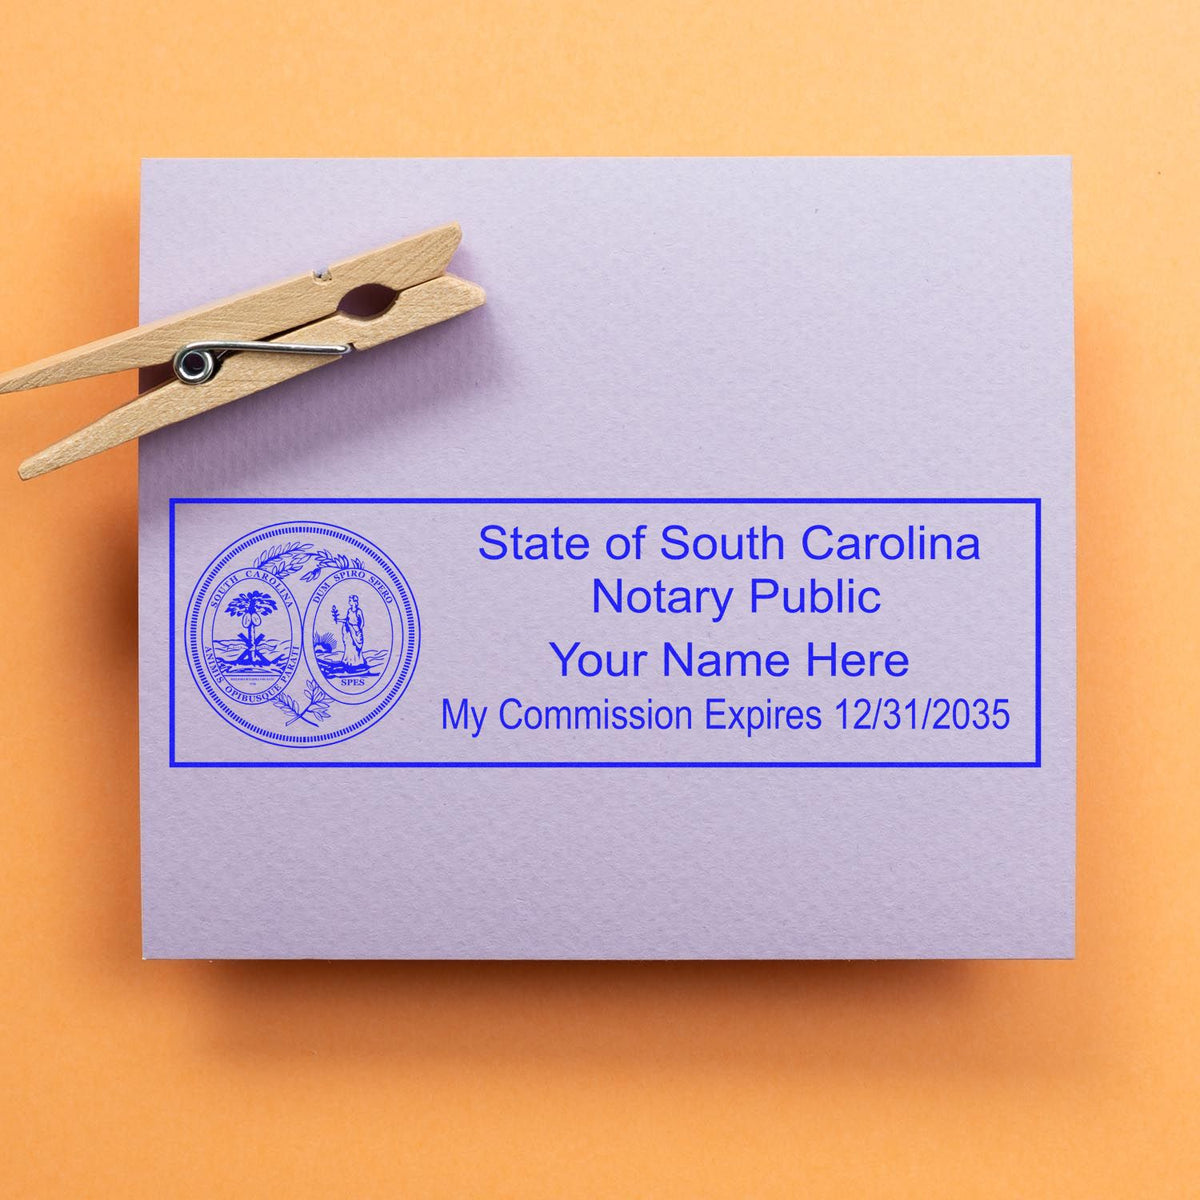 The MaxLight Premium Pre-Inked South Carolina State Seal Notarial Stamp stamp impression comes to life with a crisp, detailed photo on paper - showcasing true professional quality.